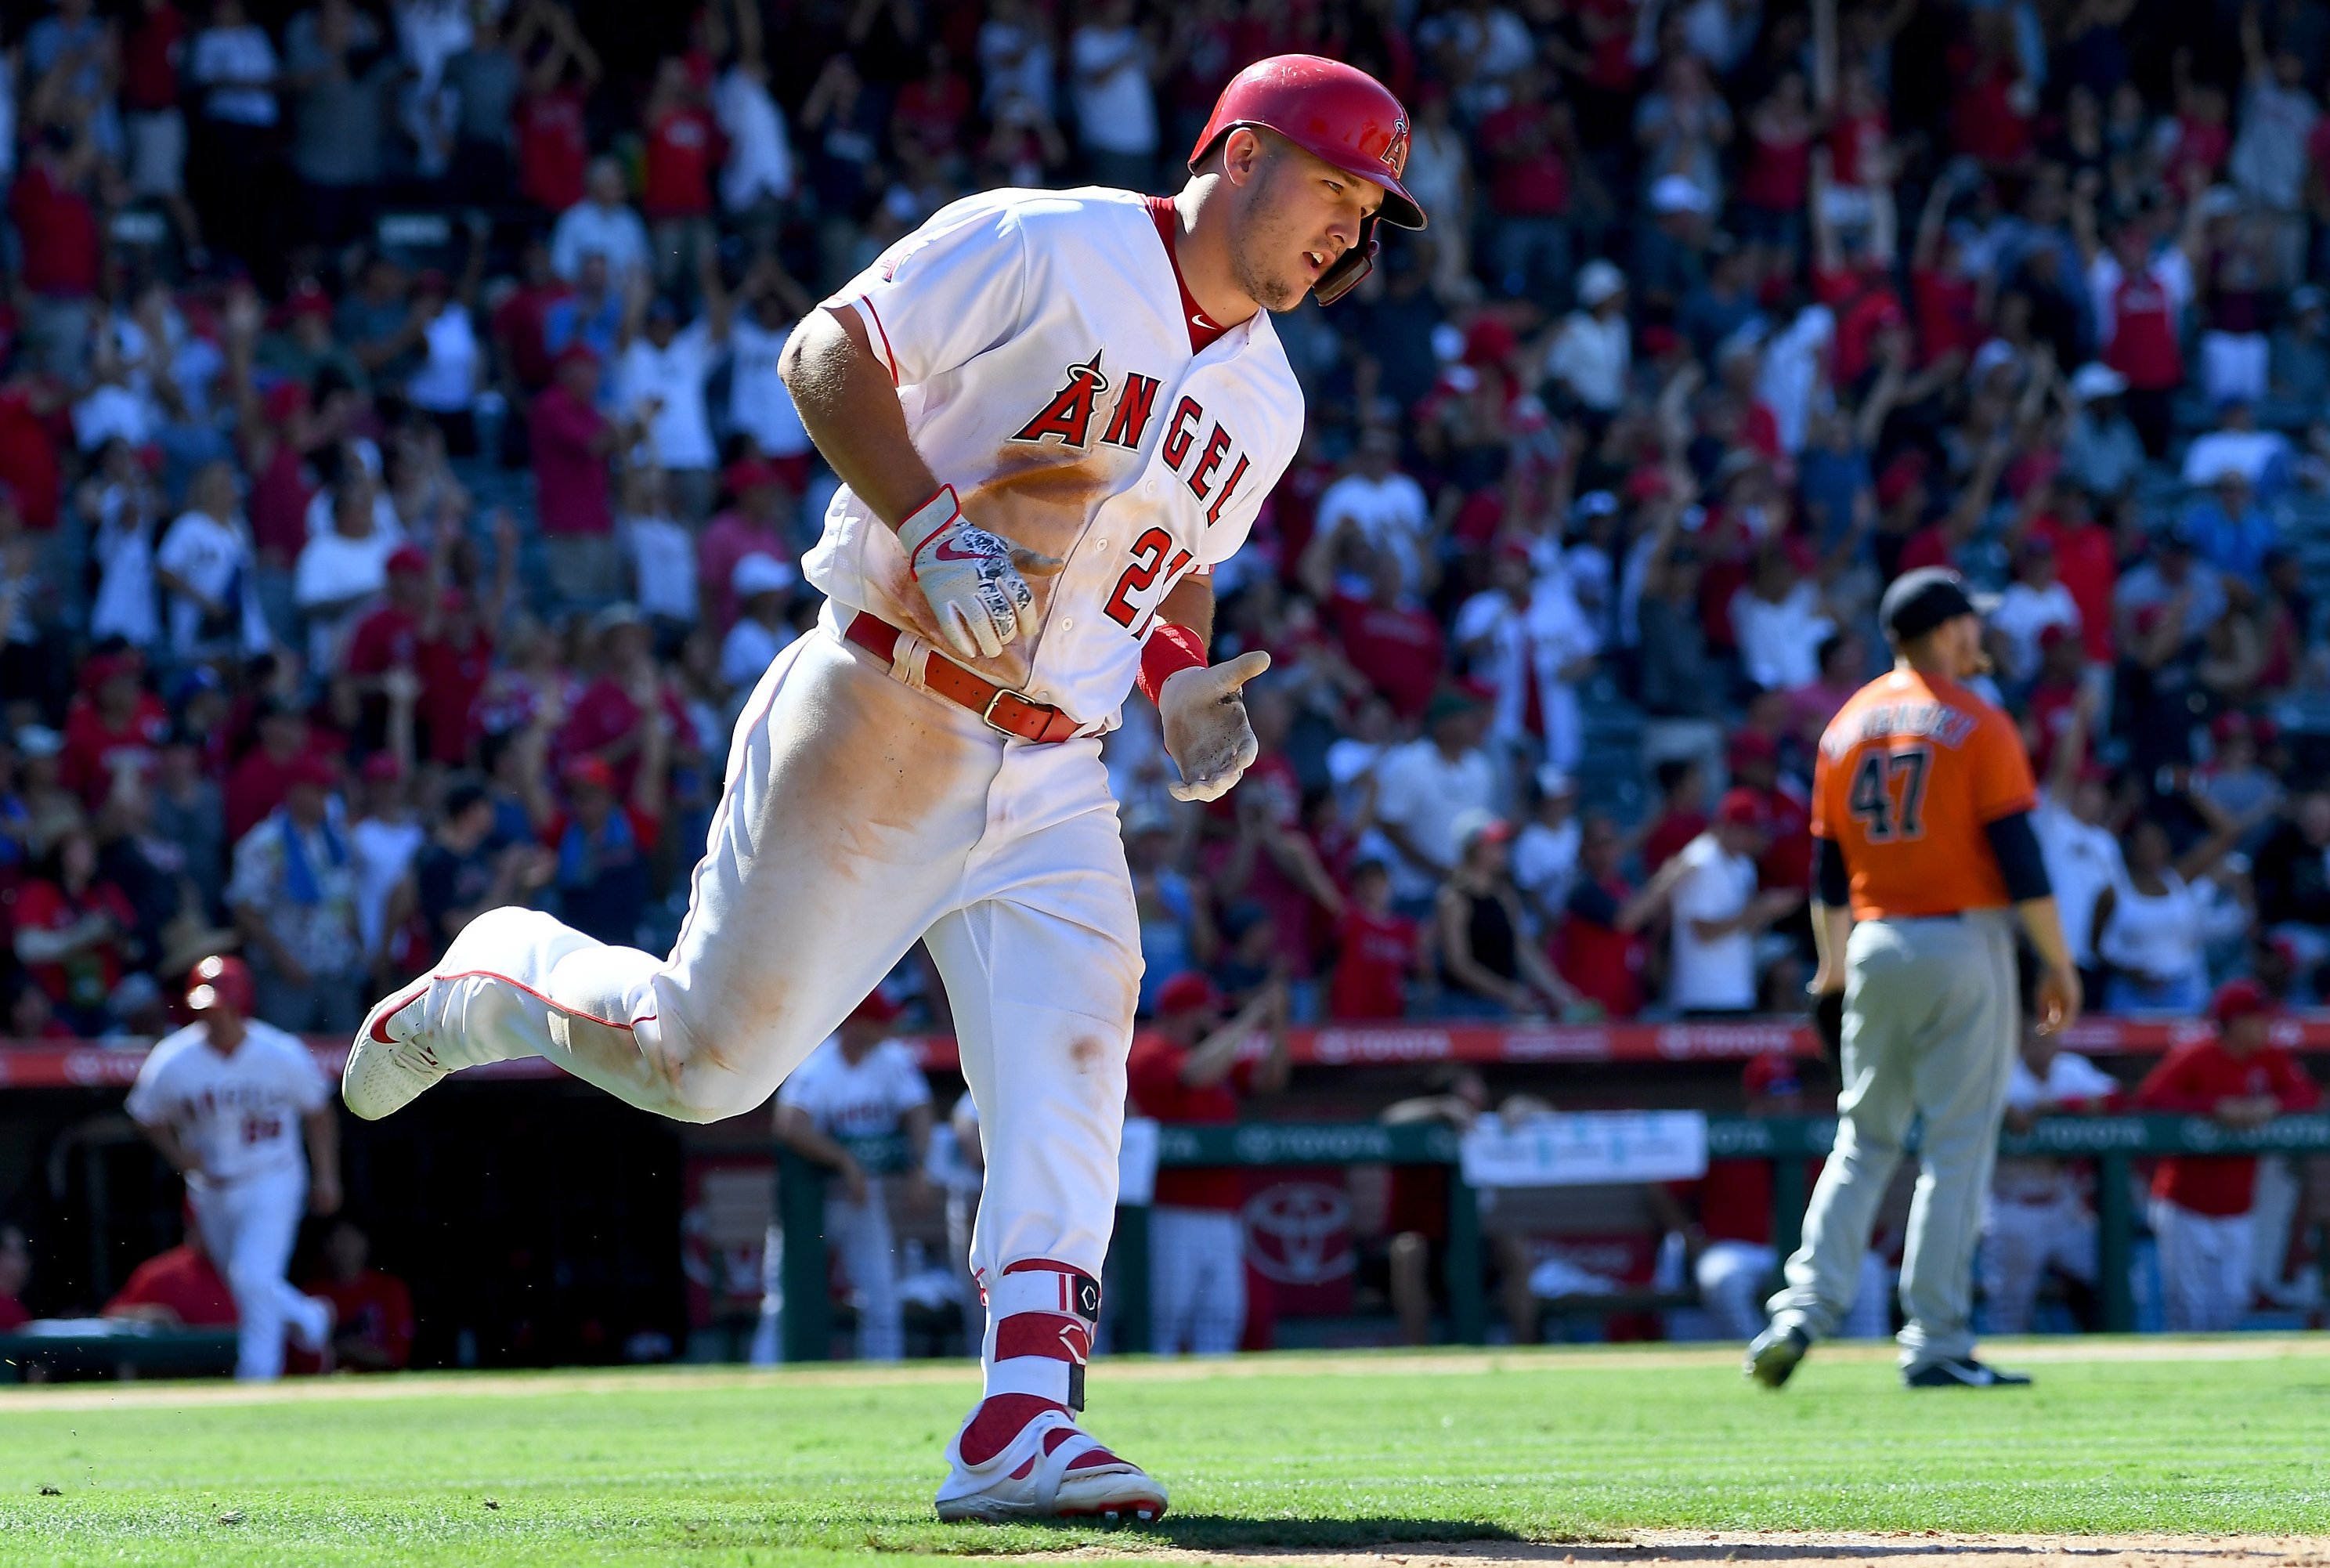 A still-grieving Mike Trout returns to Angels and honors late